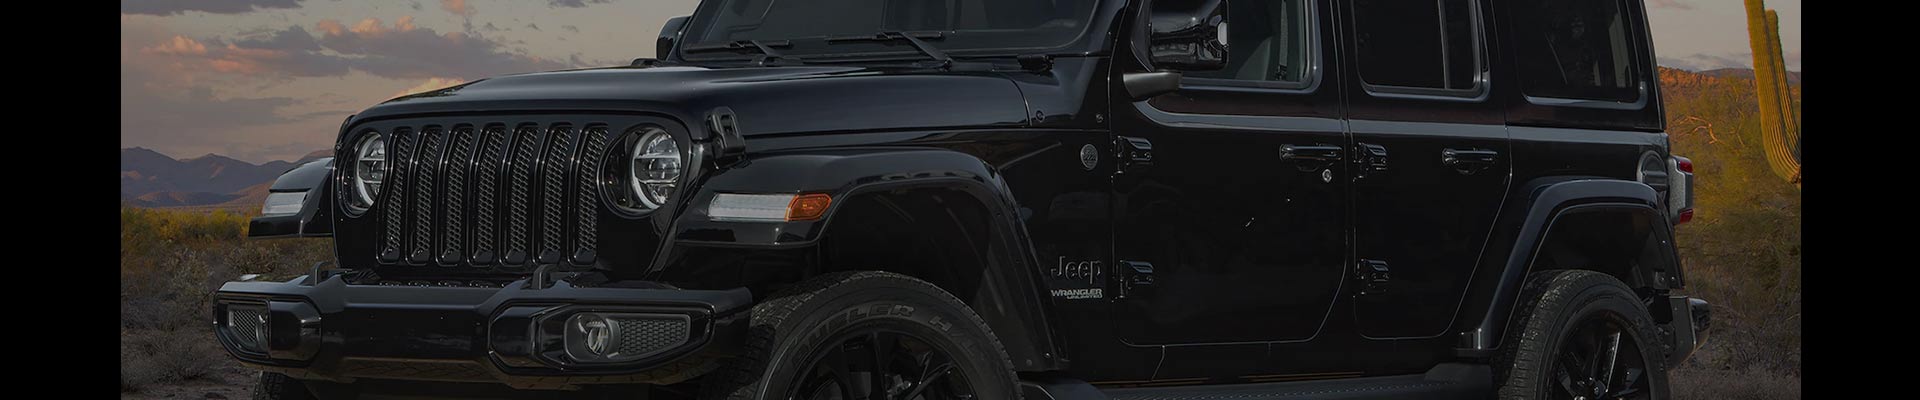 Shop Replacement and OEM 1992 Jeep Wrangler Parts with Discounted Price on the Net